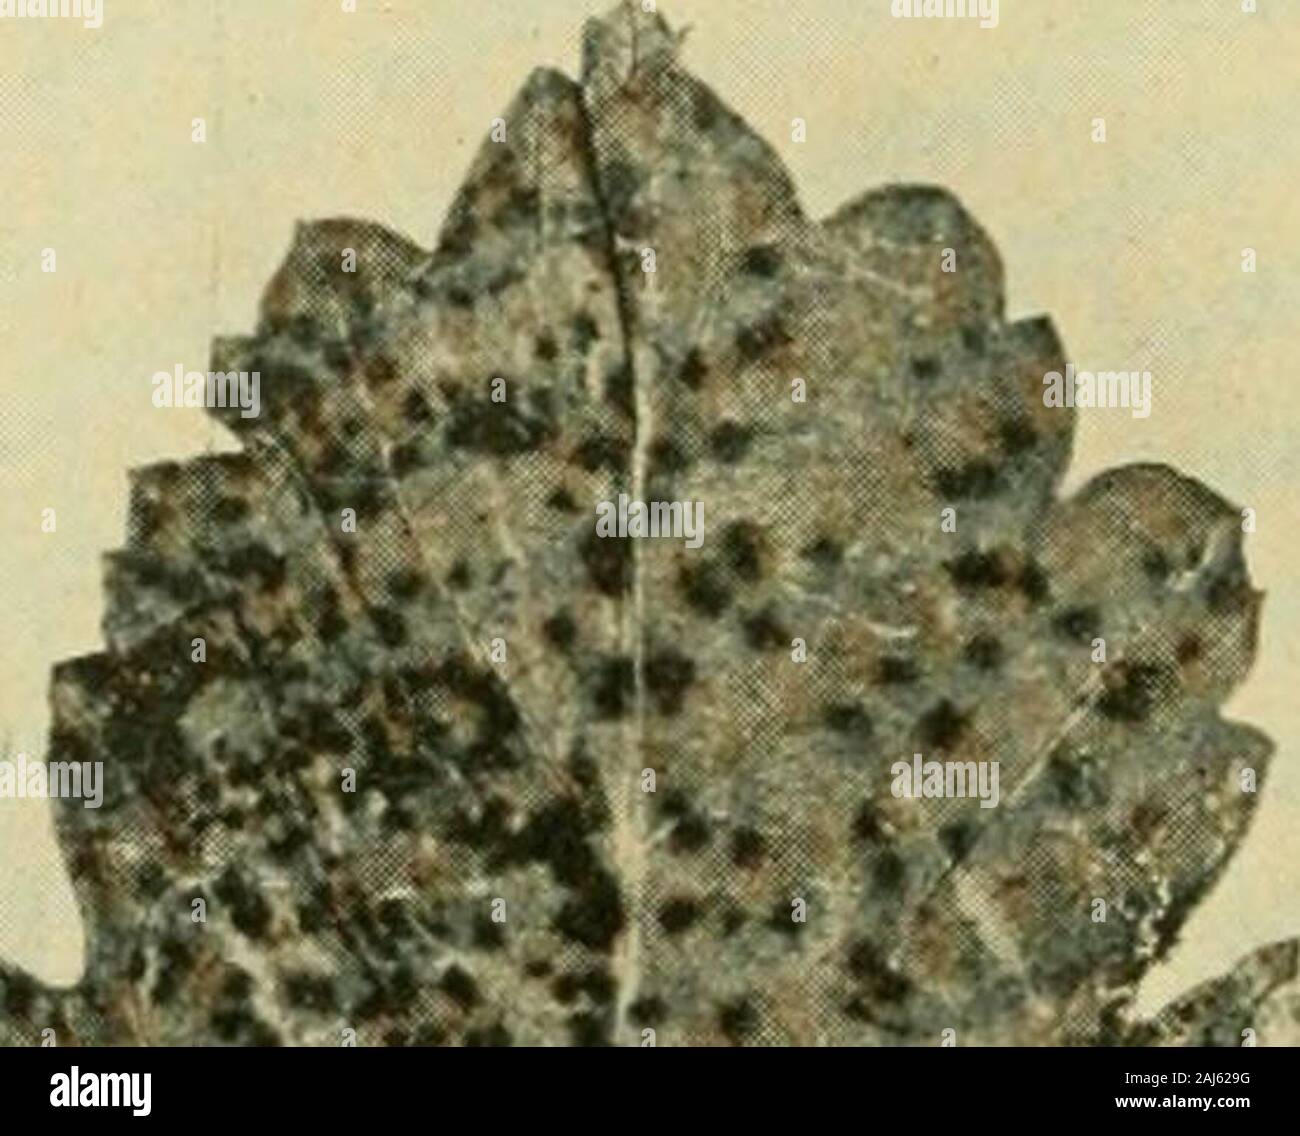 Fungous diseases of plants . arise numerous conidiophores,bearing elliptical or strongly curved, falcate conidia. These fruit-ing masses rupture the epidermis and the spores escape in a gelat-inous mass. The acervuli are produced very abundantly on bothsurfaces of the leaves but particularly upon the upper surfaces.The spores are commonly 19 X 7 /a, varying, however, from 12-24 X 5-9 At. Formerly, it was suggested that this gloeosporial formmight be connected with Gnomoniella circinata (Fckl.) Sacc. 206 FUNGOUS DISEASES OF PLANTS Klebahn in his investigations of this fungus ascertained thatwhe Stock Photo